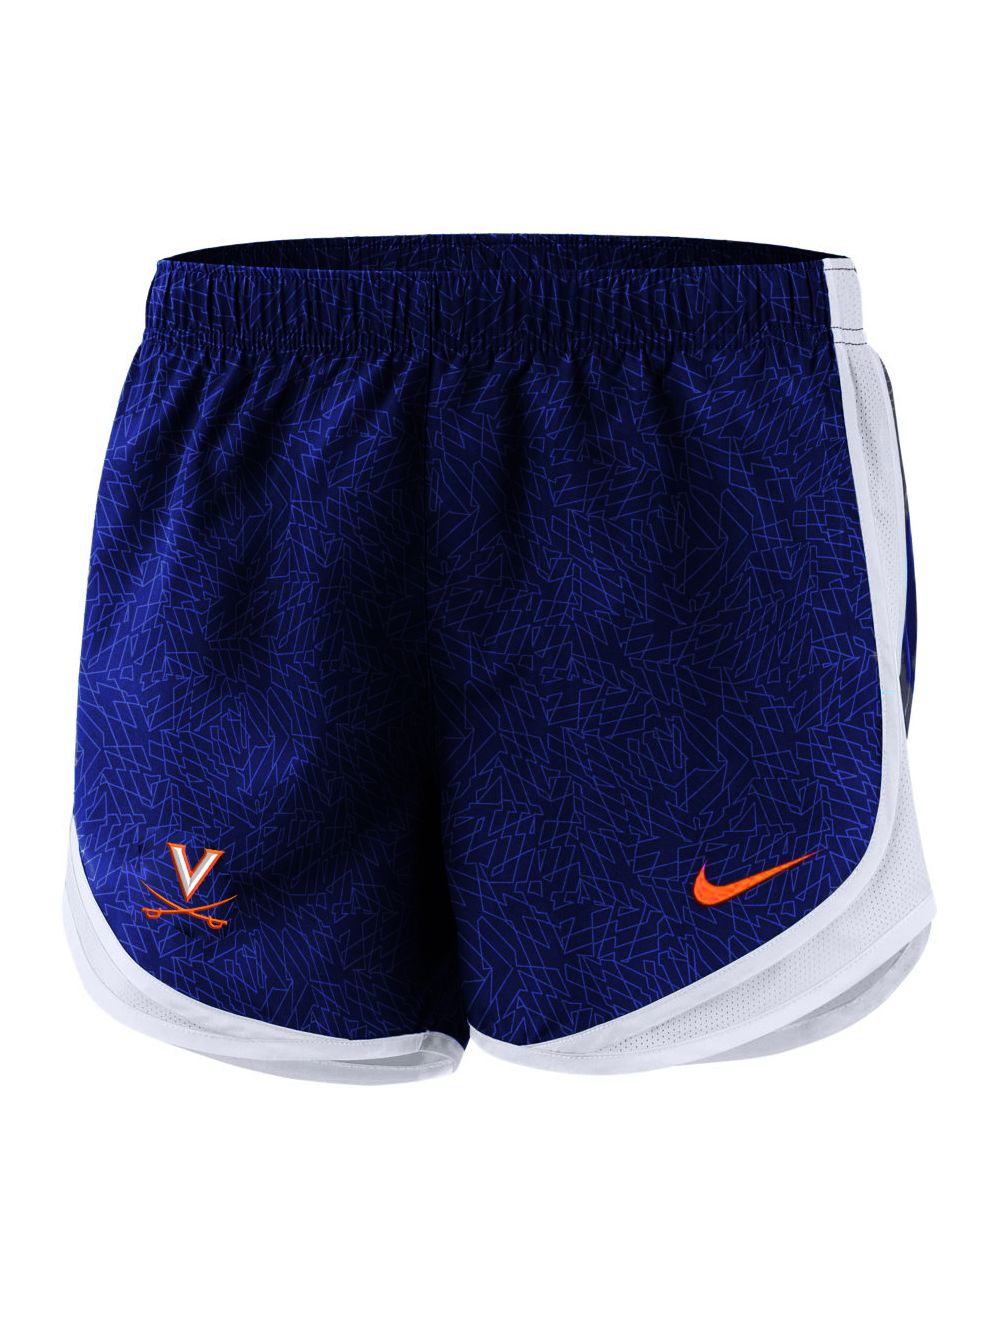 Nike and White Tempo Shorts - Mincer's of Charlottesville